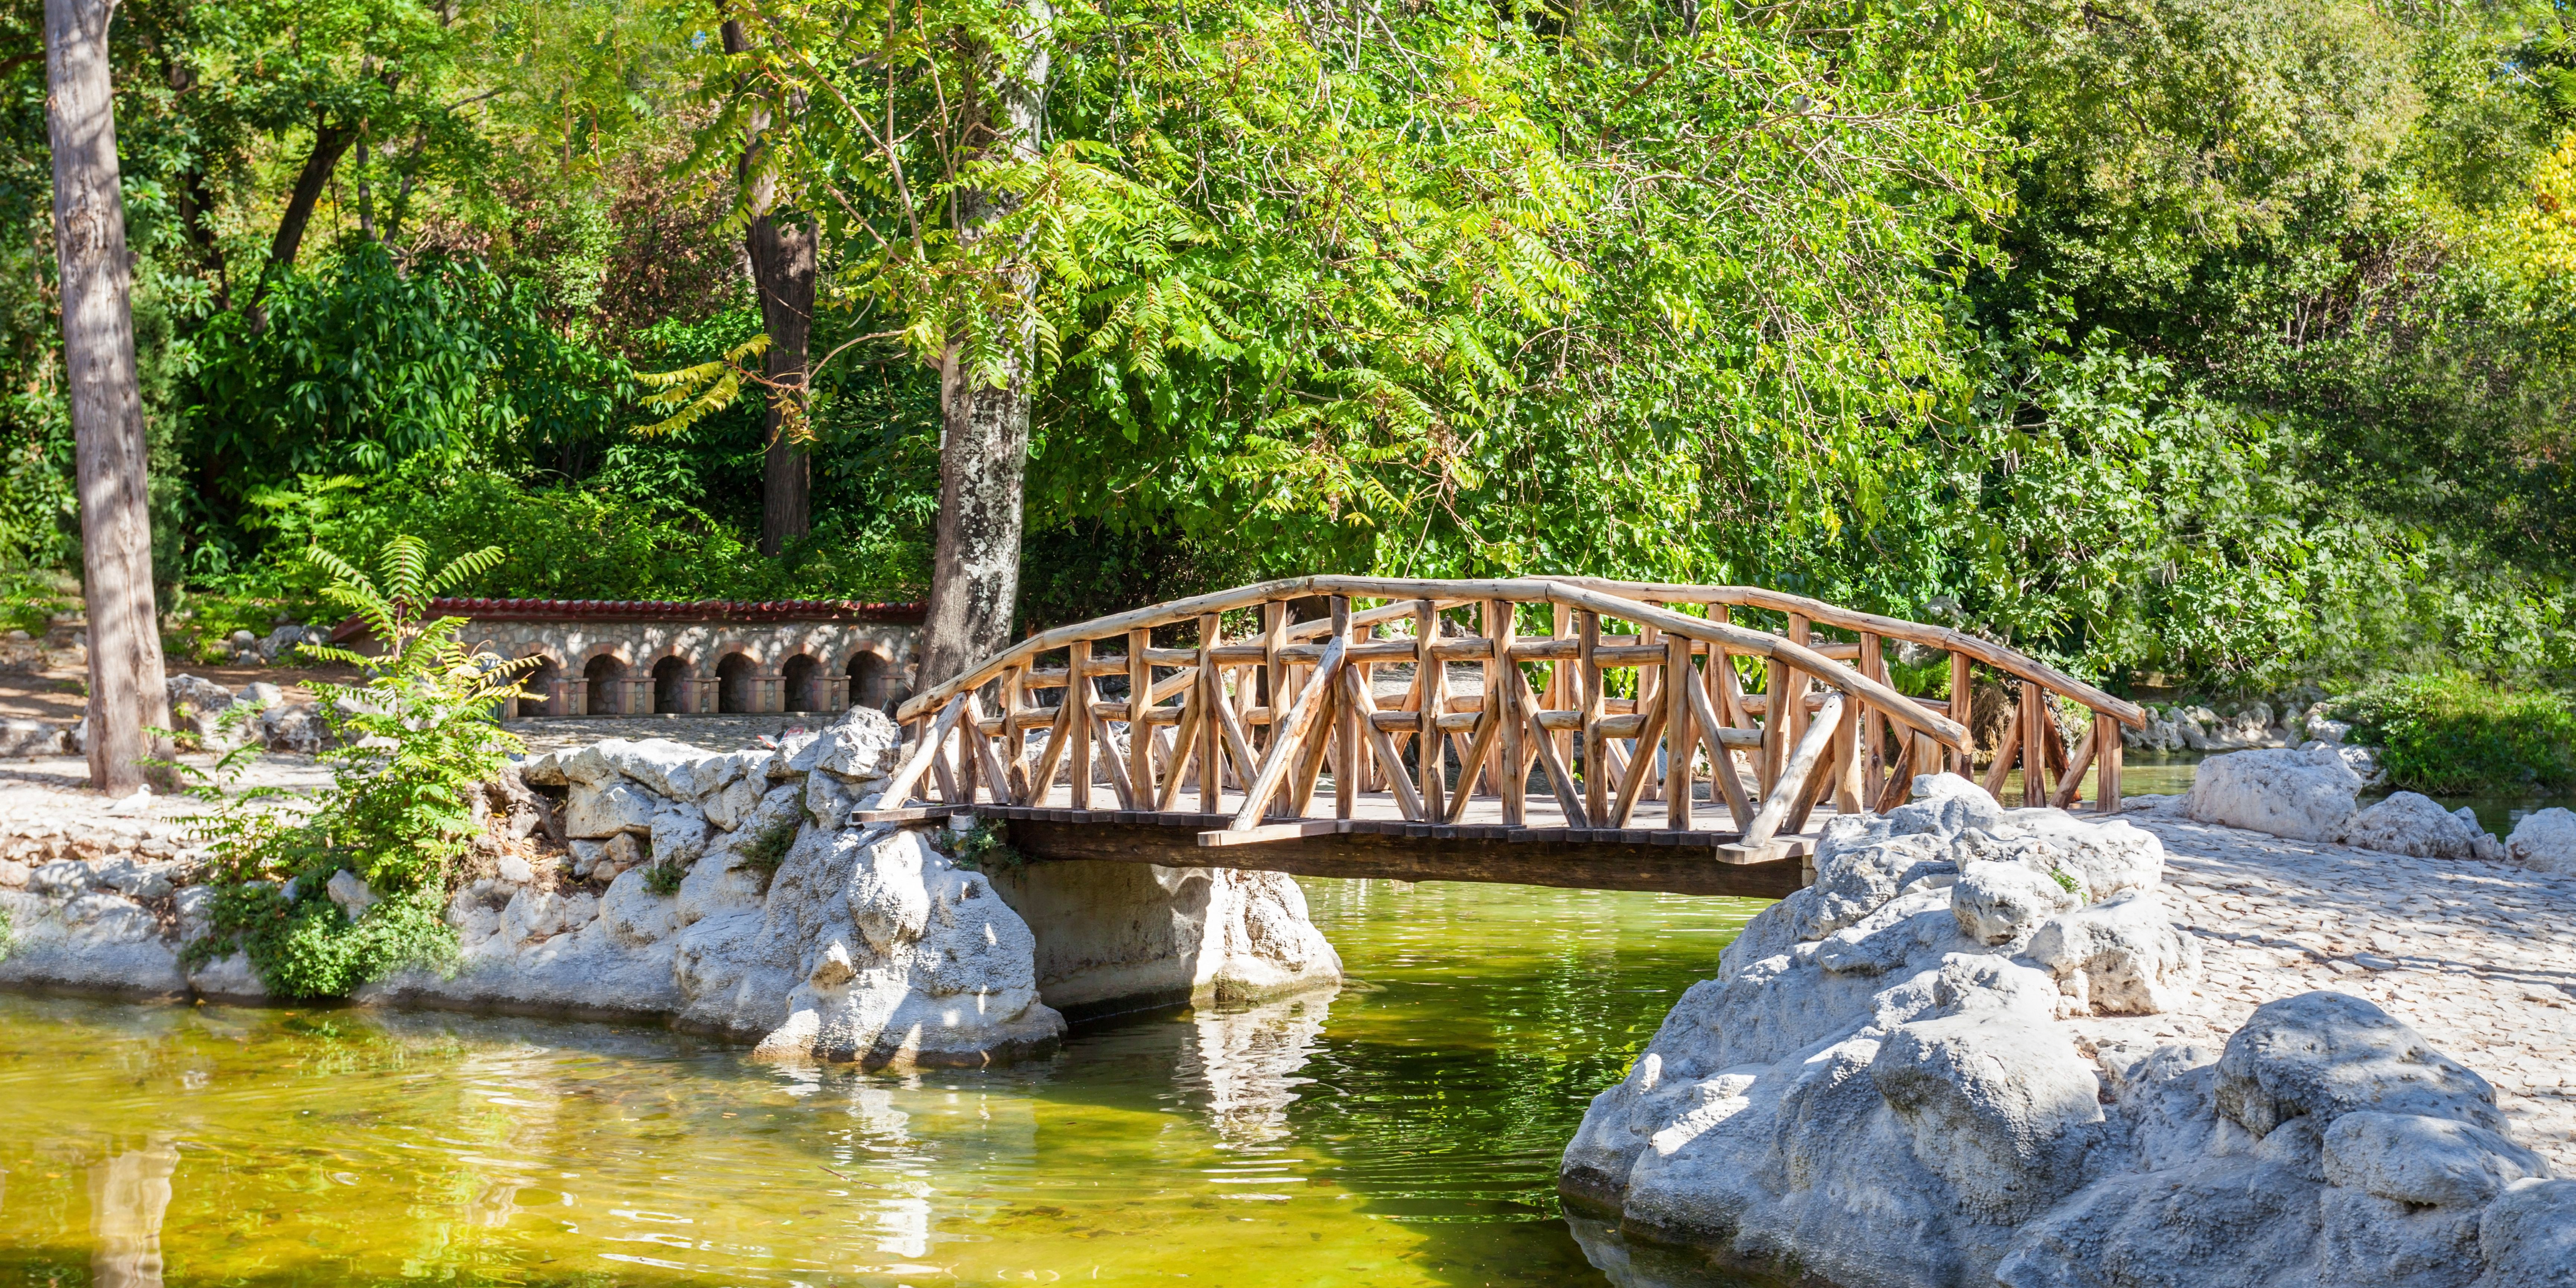 A wooden bridge over a pond in the National Gardens of Athens.